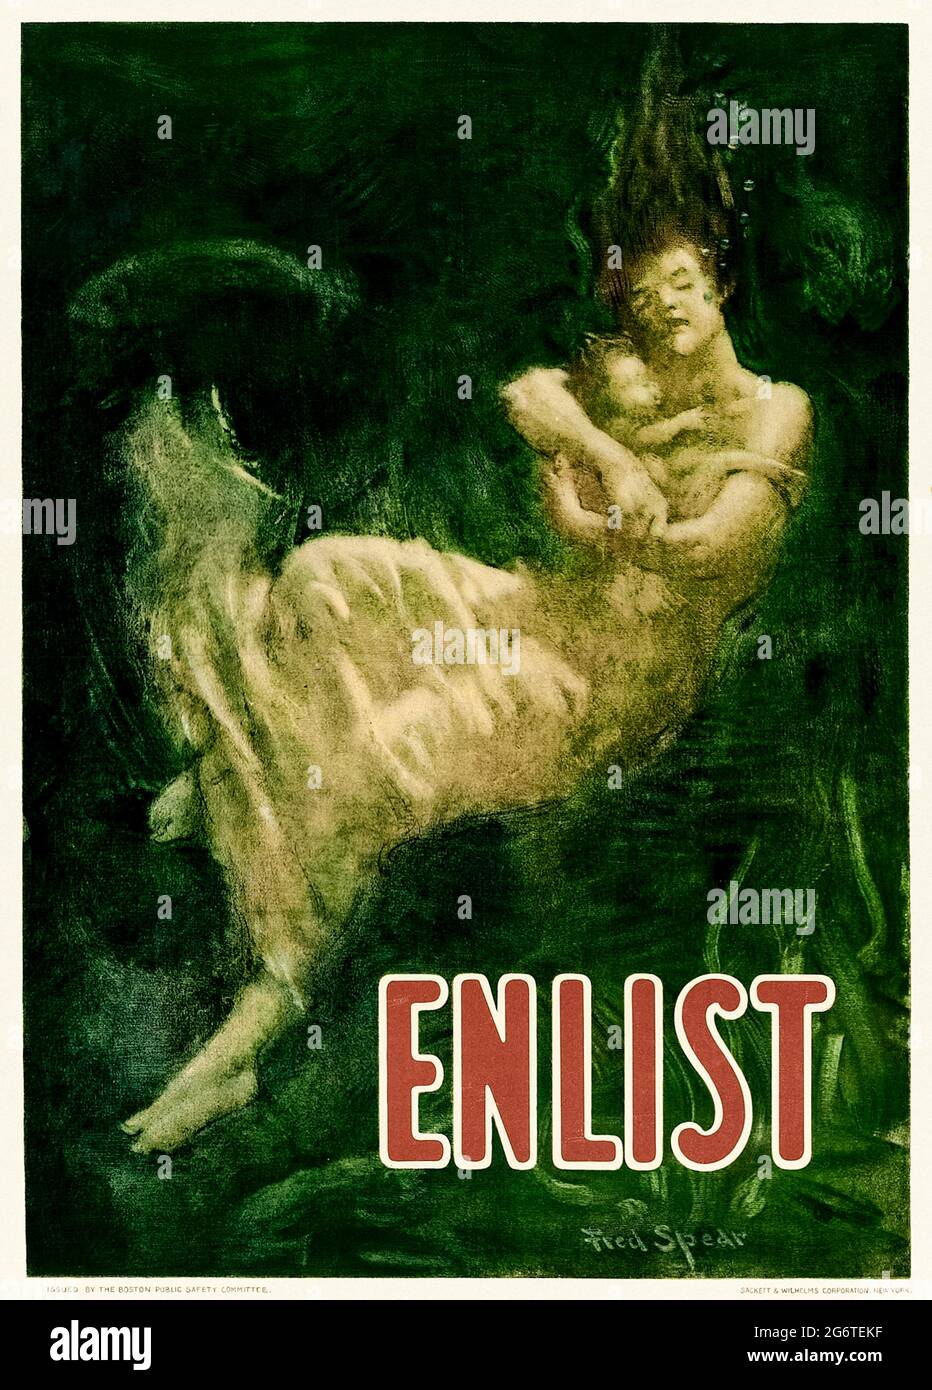 ‘ENLIST’ 1915 poster showing a mother and child drowning published by the Boston Committee of Public Safety featuring artwork by Fred Spear. This iconic poster was published a month after the sinking of the RMS Lusitania on 7 May 1915 by a German U-boat. 1198 passengers and crew died including 128 American citizens which heightened tensions between the U.S. and Germany and helped sway American opinion to enter World War 1. Stock Photo